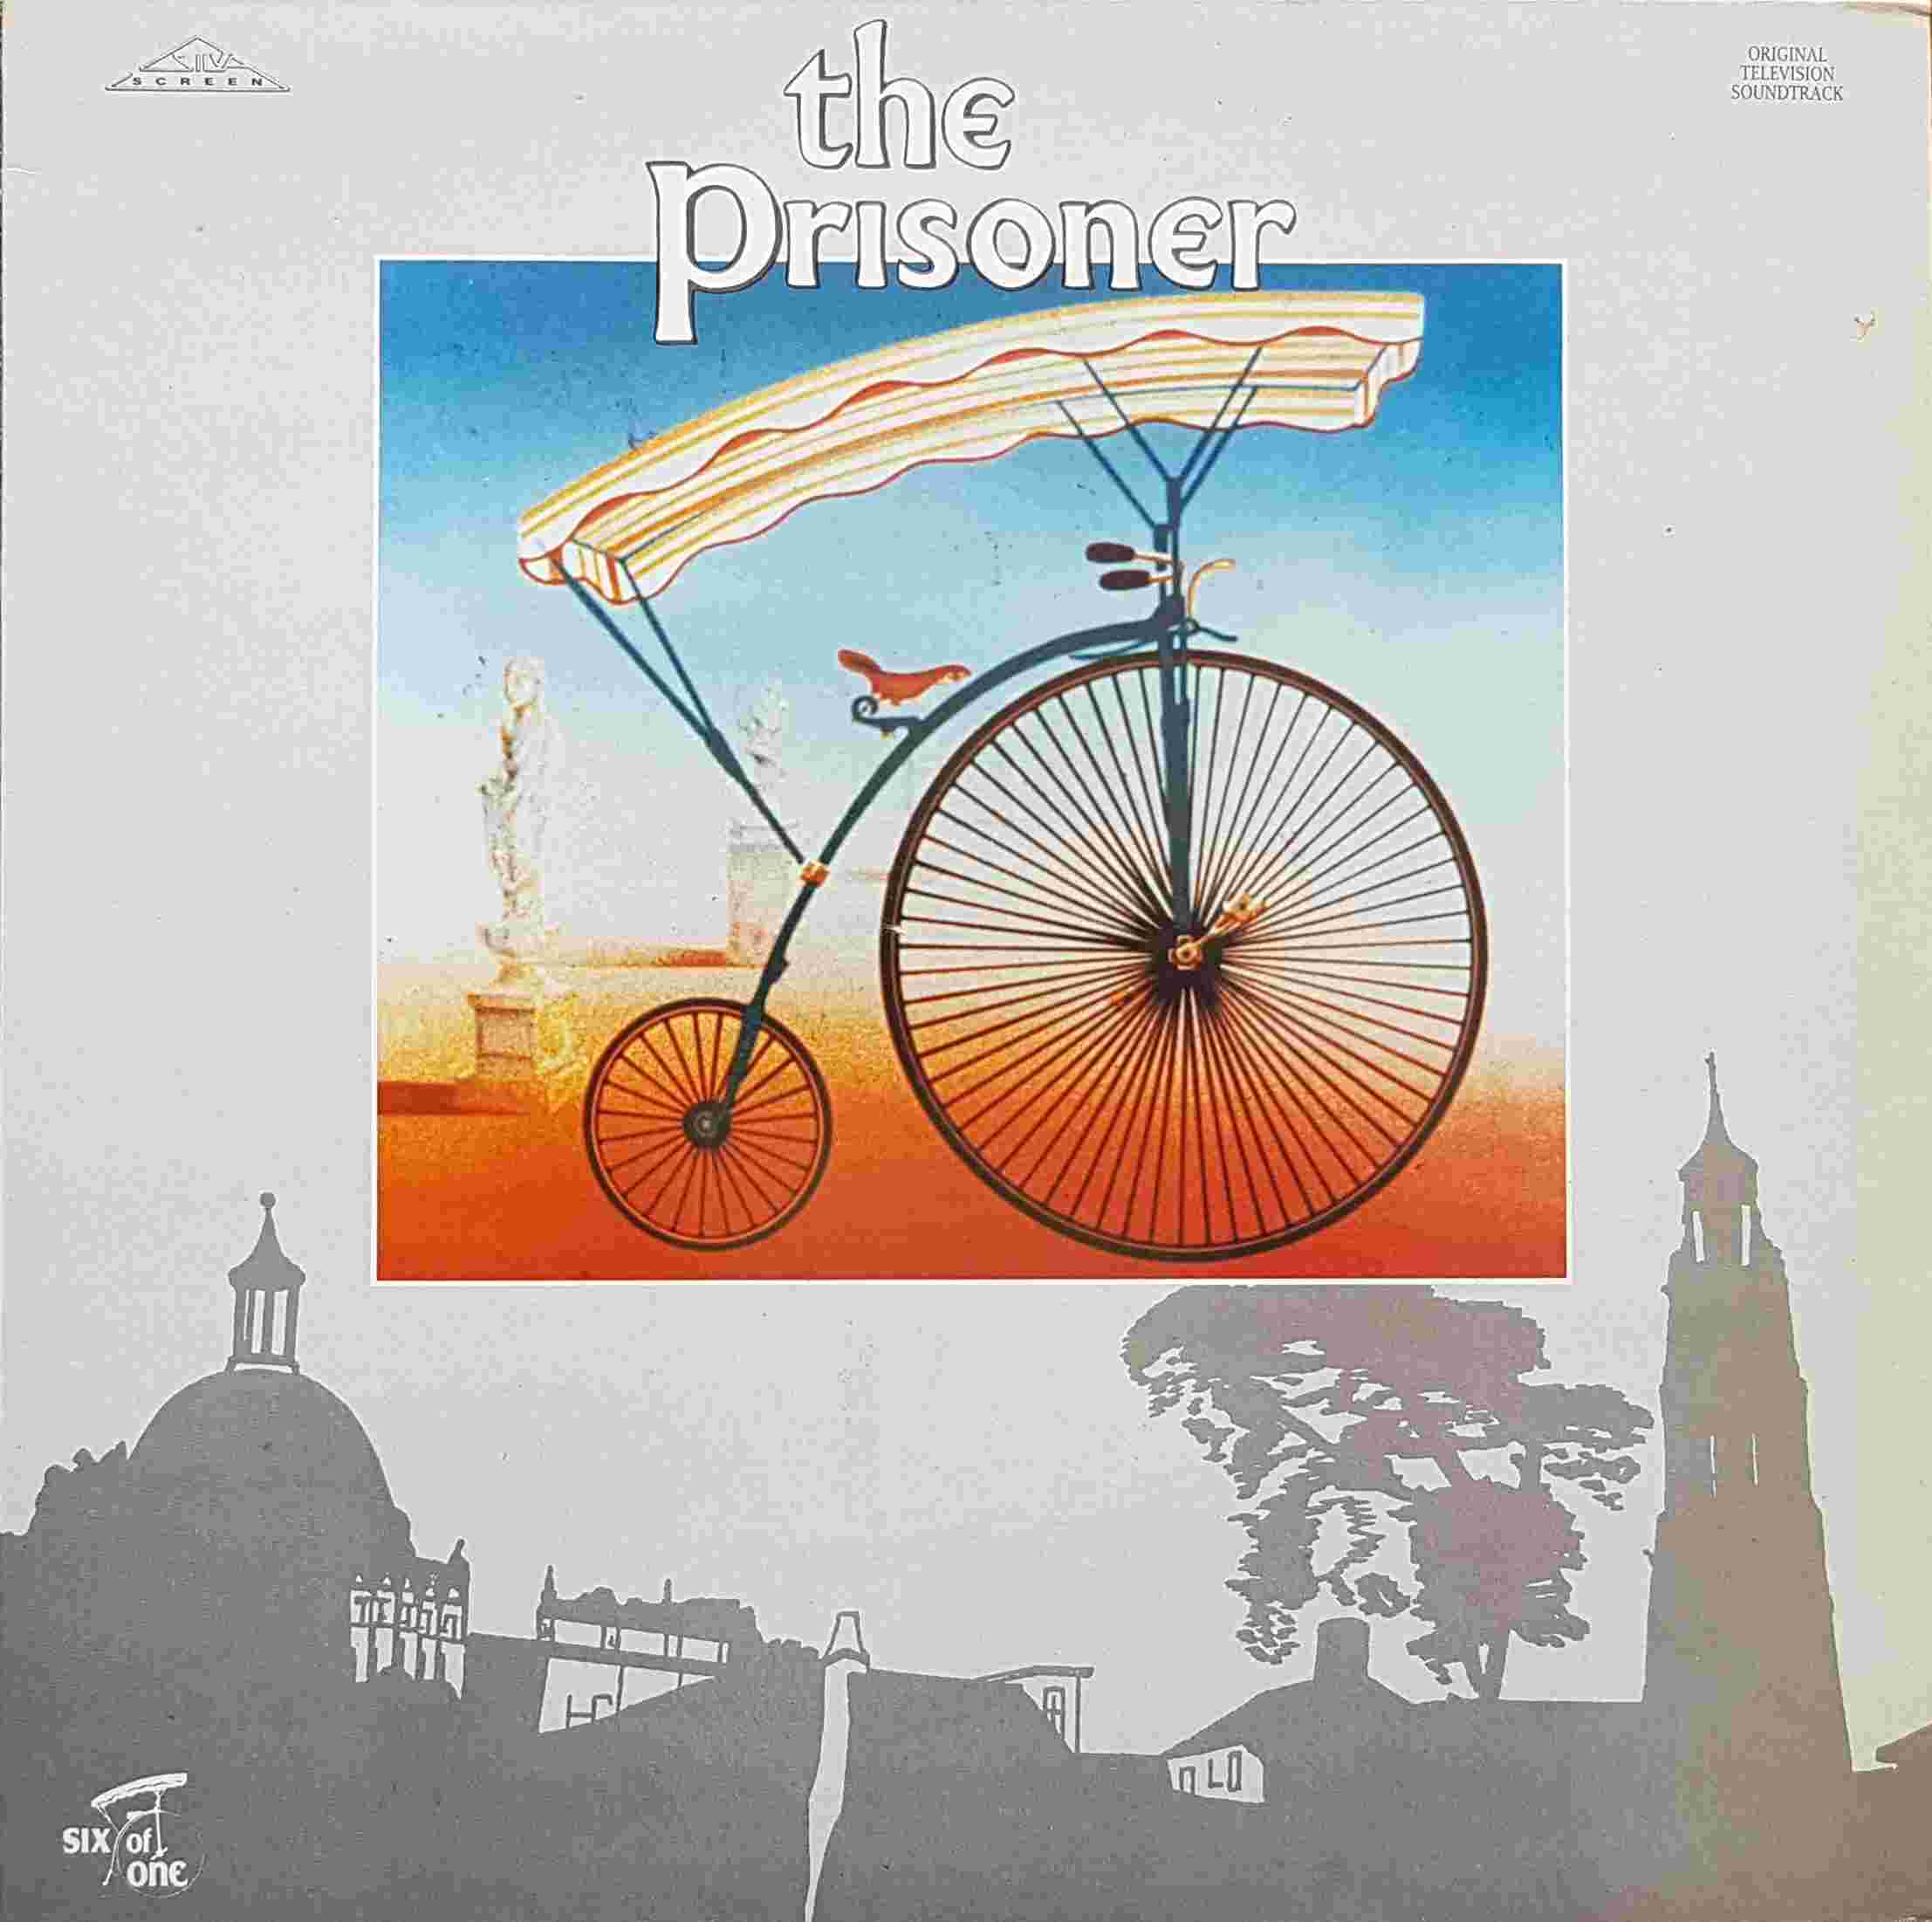 Picture of FILM 042 The prisoner - Re-release by artist Various from ITV, Channel 4 and Channel 5 albums library